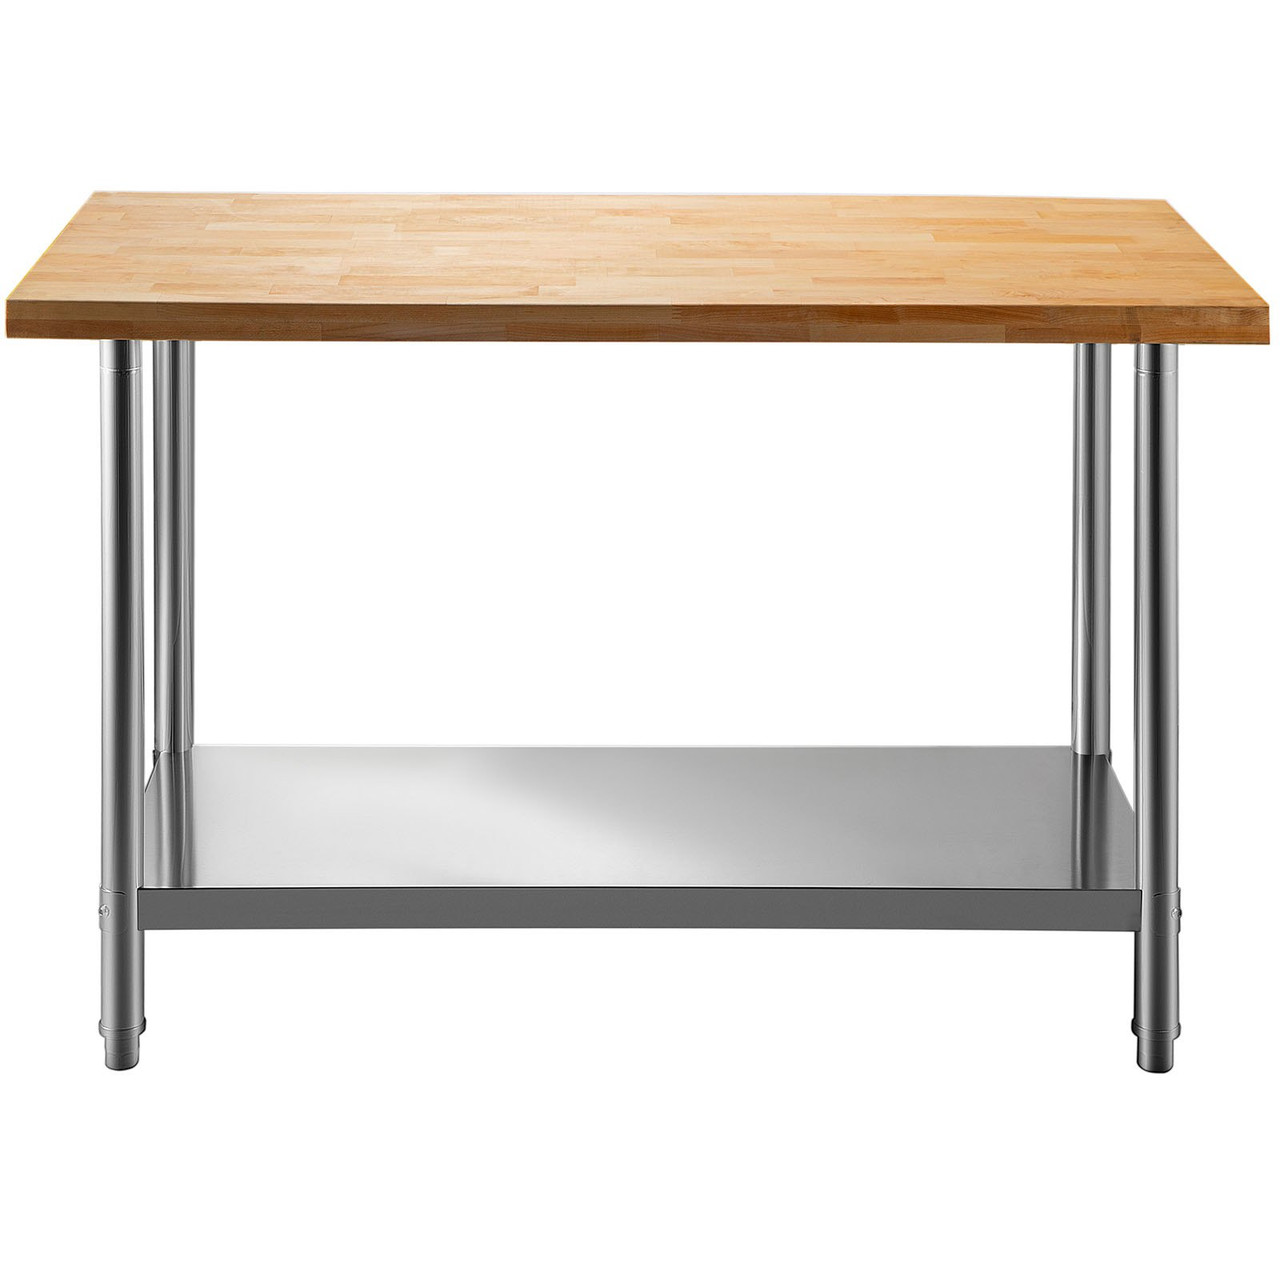 VEVOR Maple Top Work Table, Stainless Steel Kitchen Prep Table Wood, 36 x 30 Inches Metal Kitchen Table with Lower Shelf and Feet Stainless Steel Table for Prep & Work Outdoor Prep Table for Kitchen